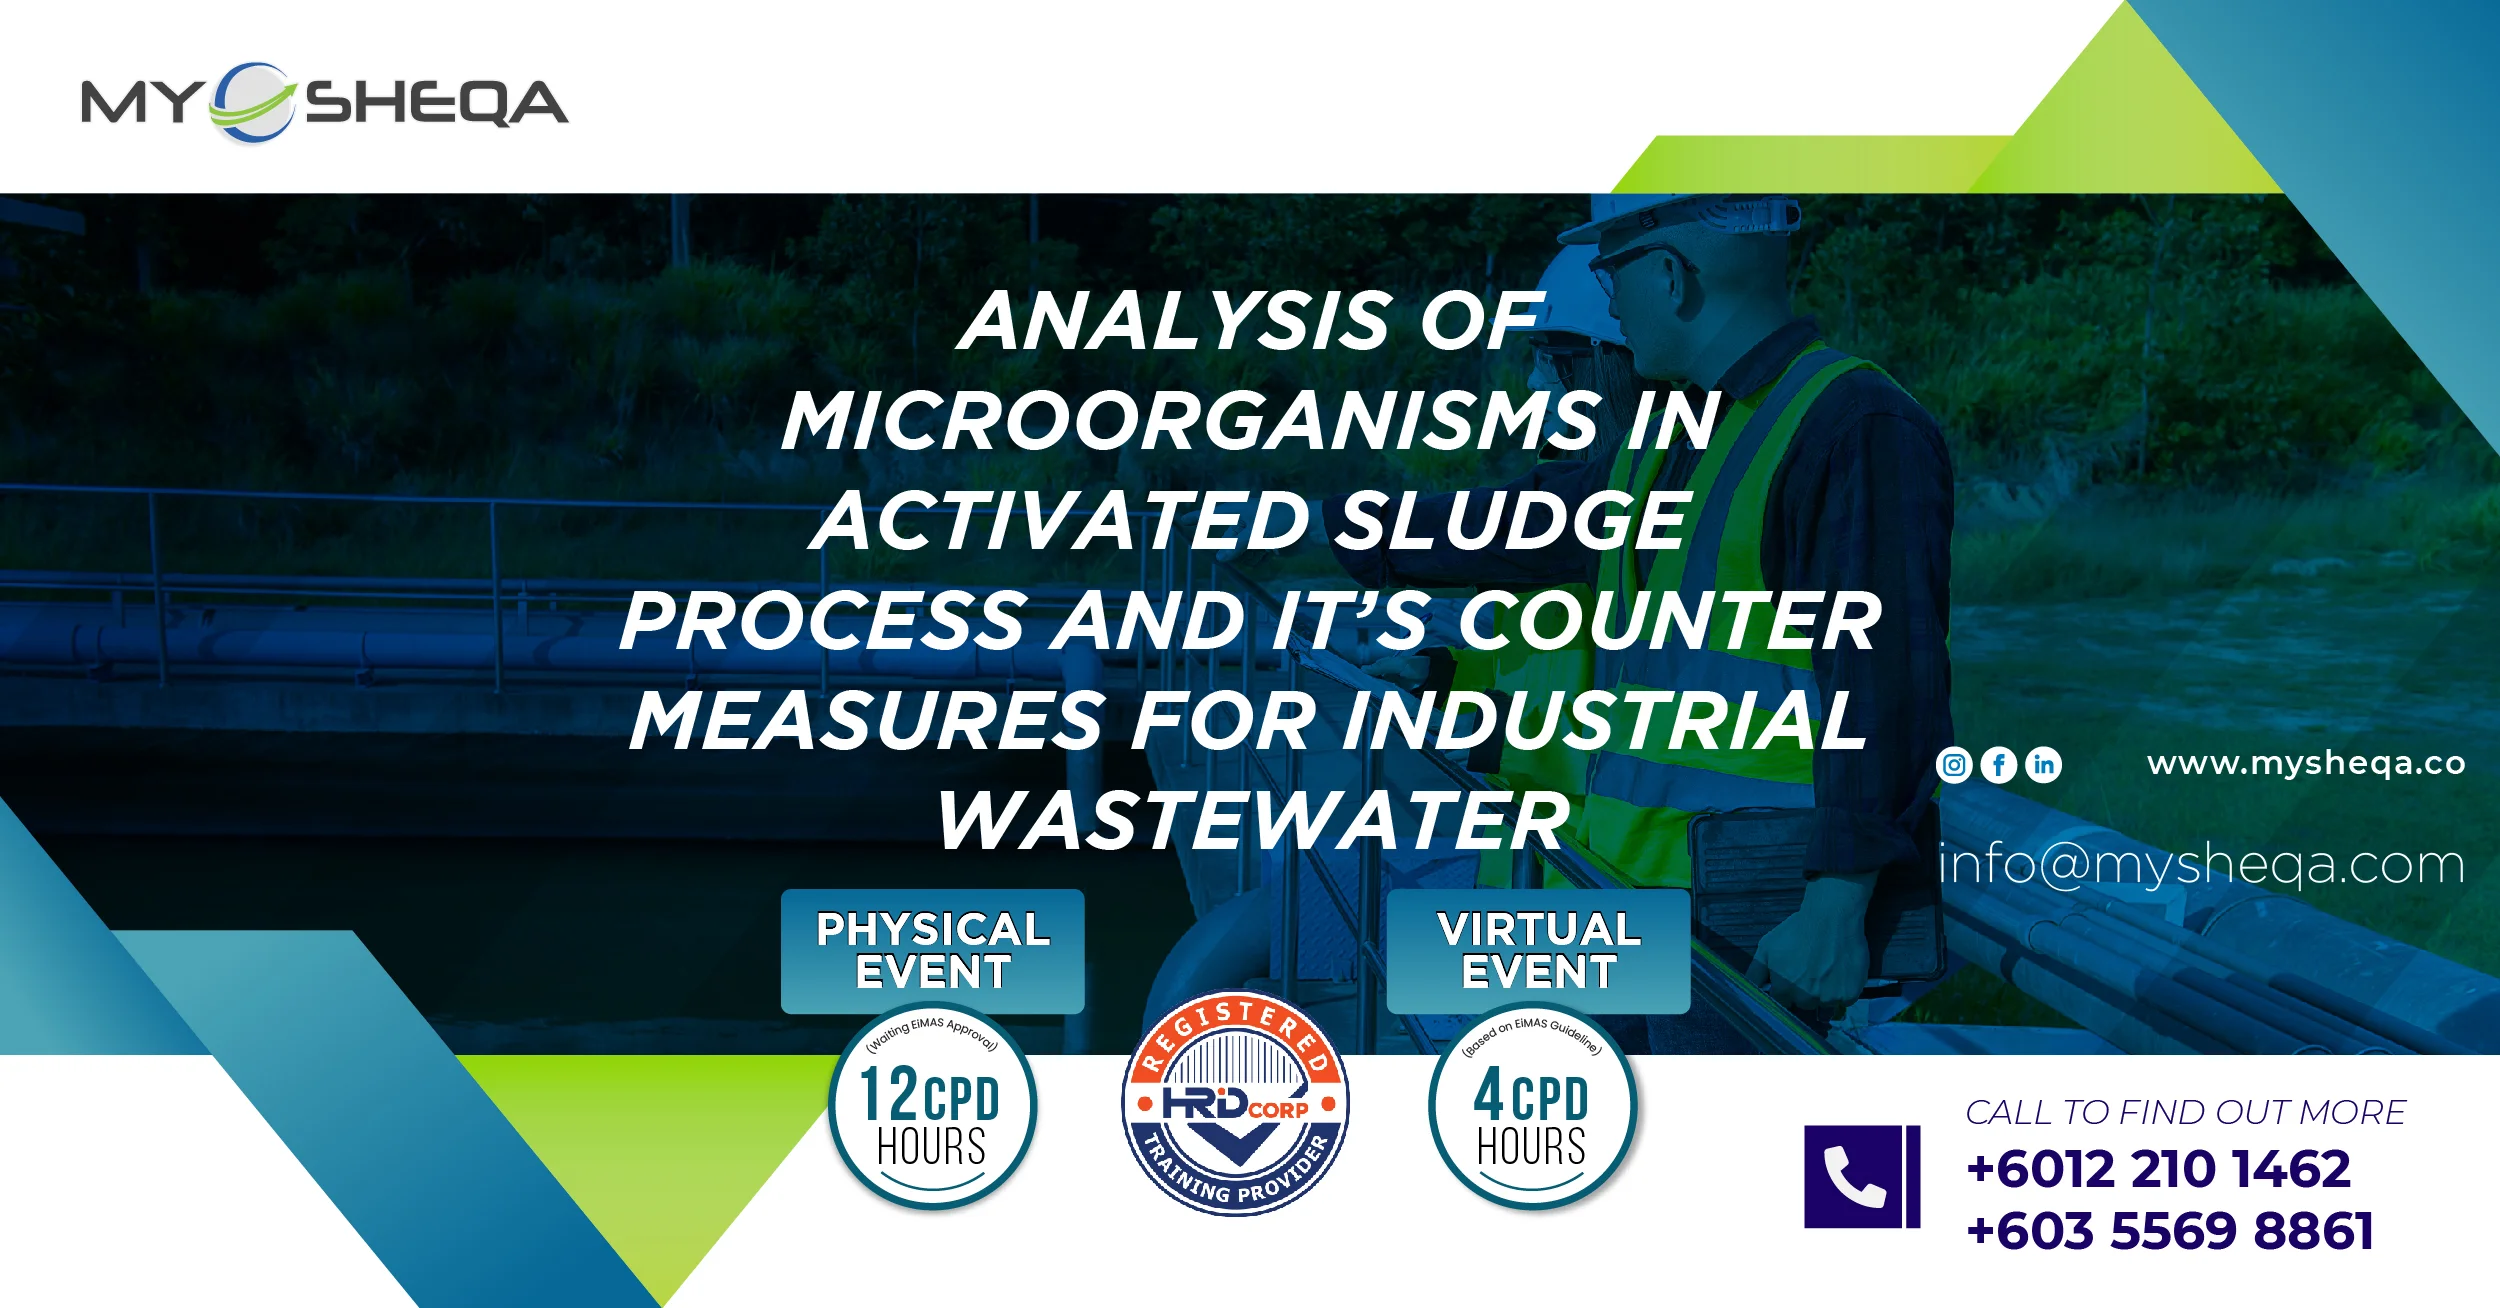 Analysis Of Microorganisms in Activated Sludge Process and It’s Counter Measures for Industrial Wastewater-01